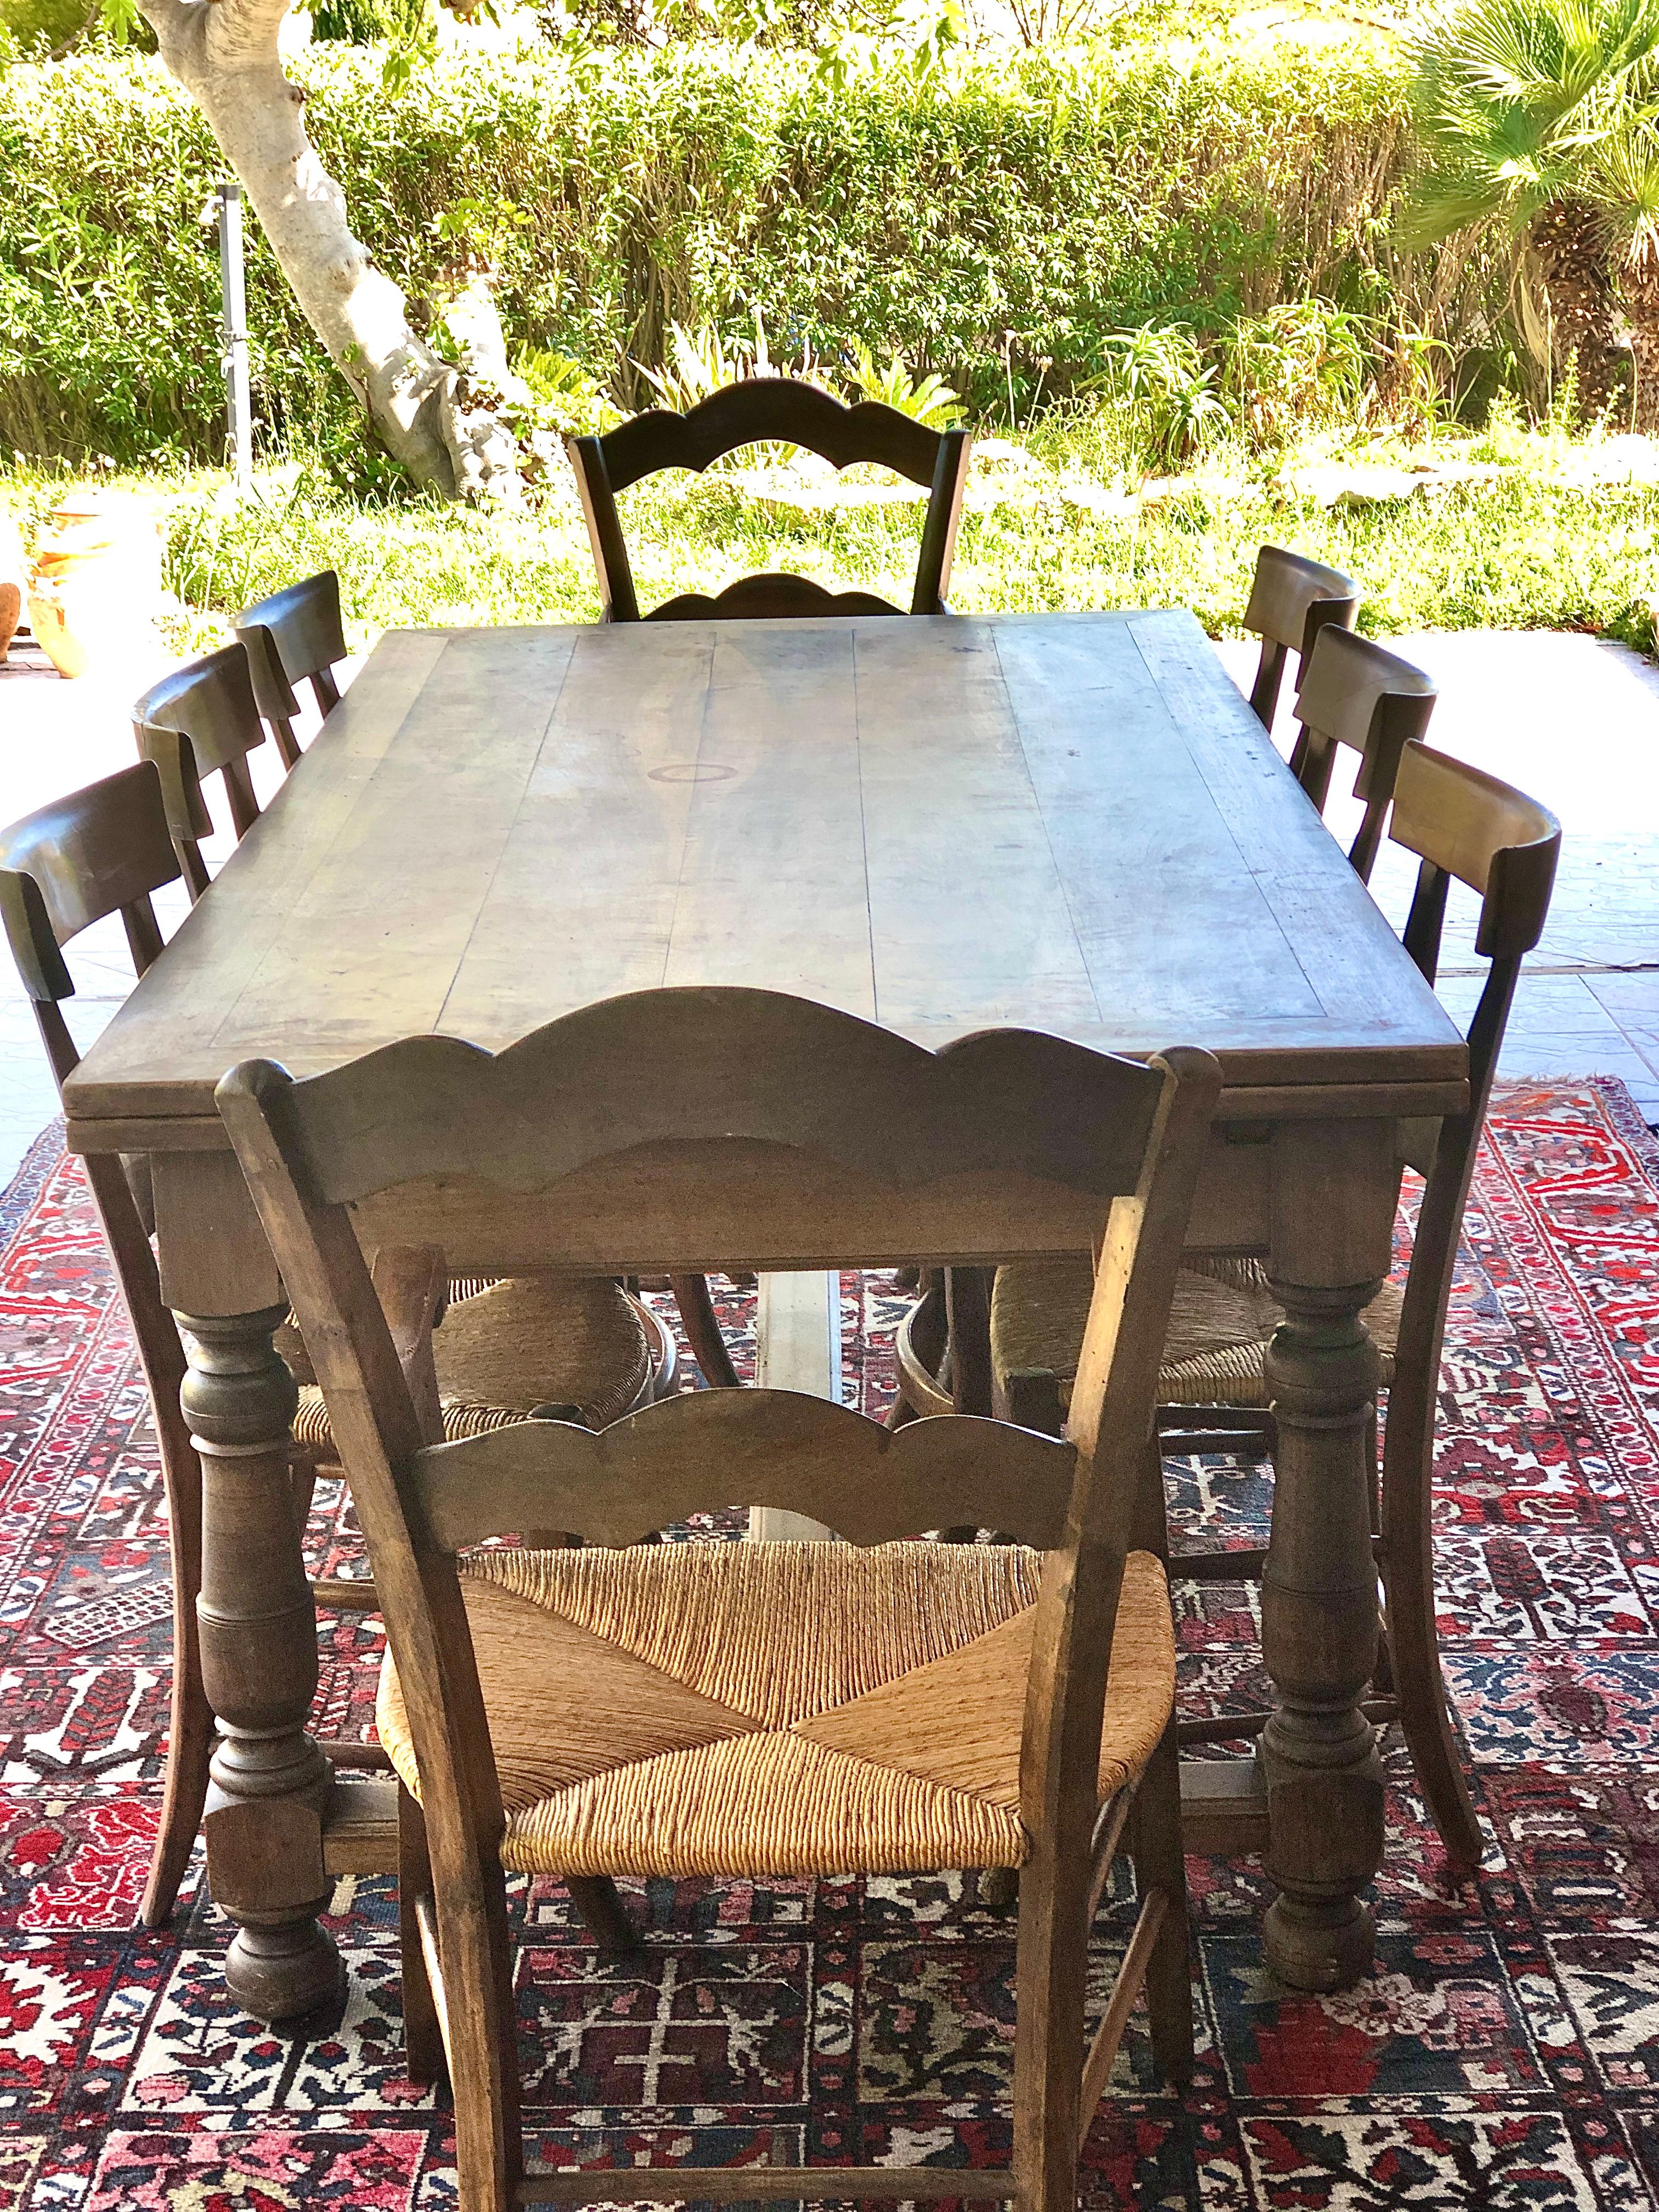 A robust 18th century French provincial farmhouse dining table, its warmly patinated rectangular top supported by four baluster-turned legs, joined by an 'entretoise' (H stretcher). Boasting two “allonges à l'italienne” (Italian-style extenders),